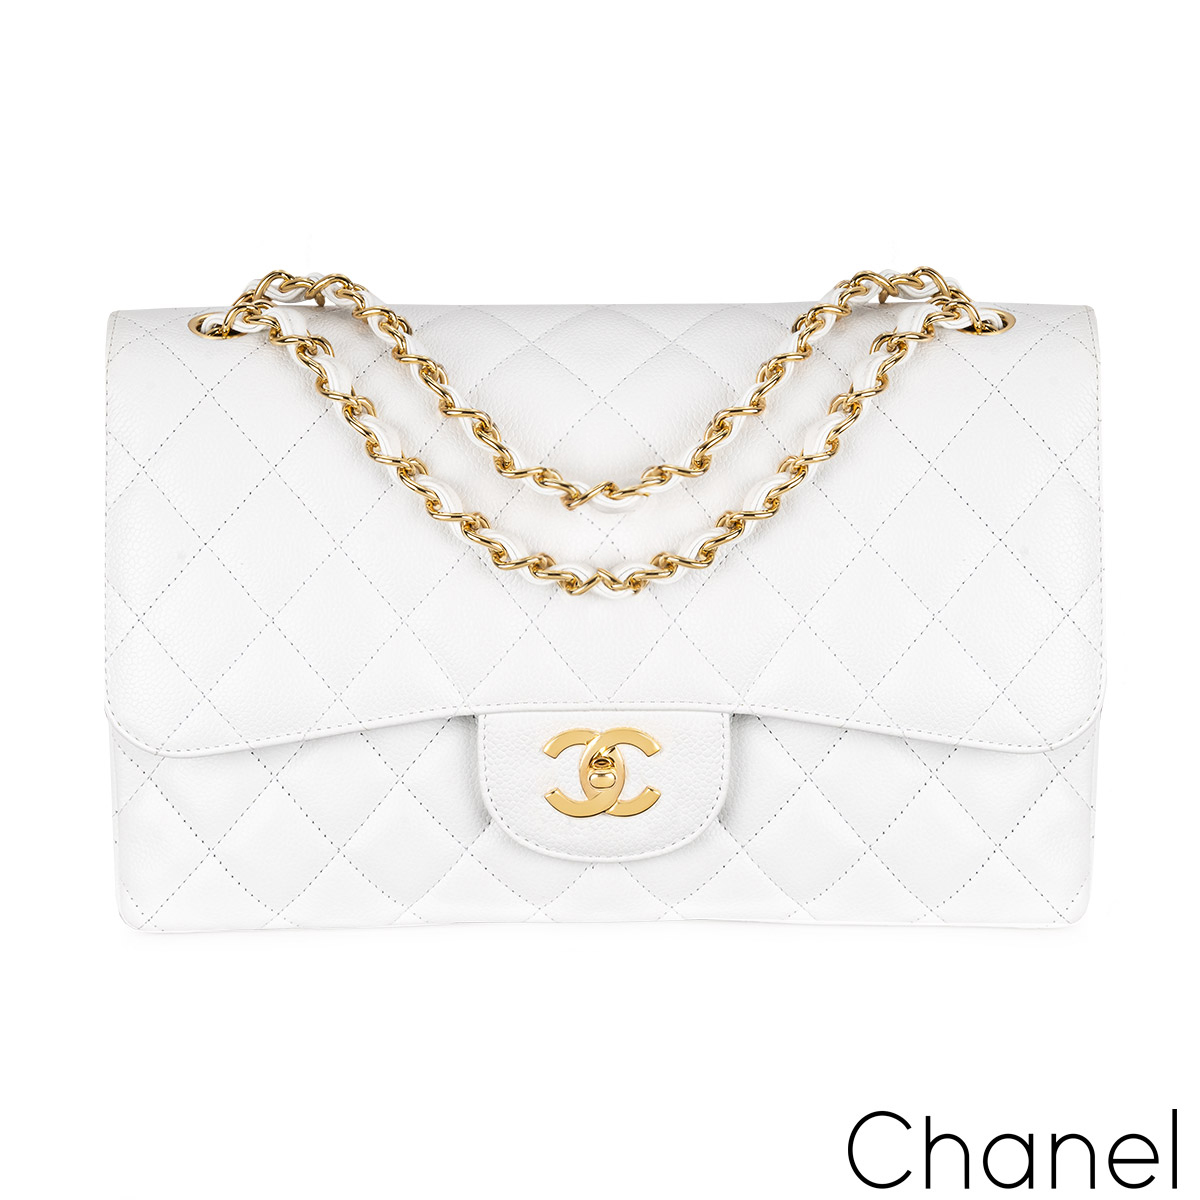 Chanel Classic double flap bag  THE HOUSE OF WAUW